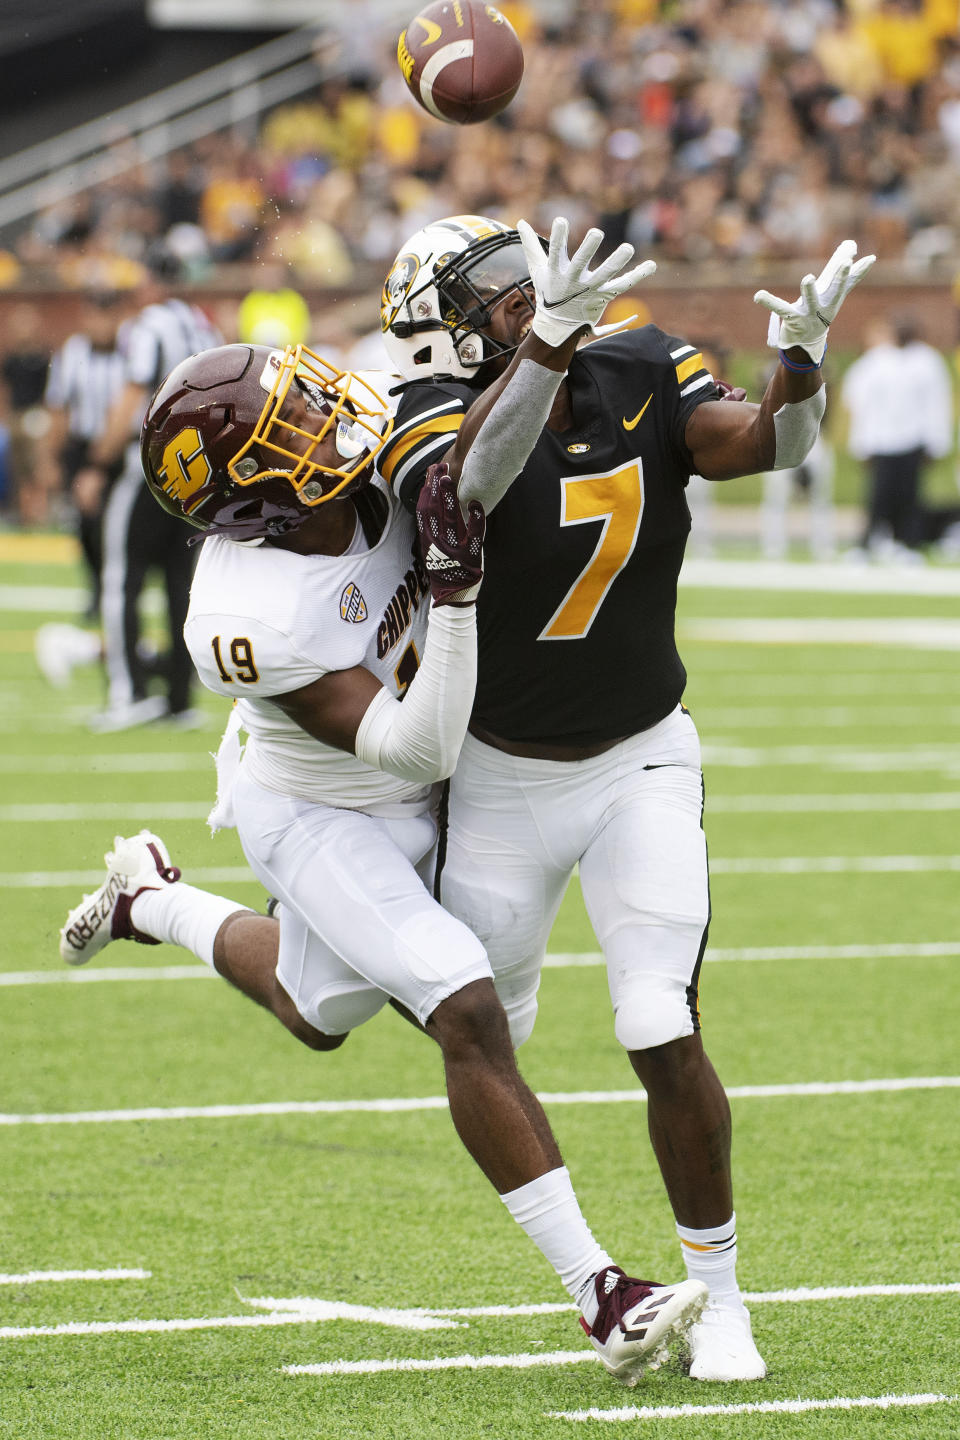 Central Michigan's Donte Kent, left, breaks up a pass intended for Missouri's Dominic Lovett, right, during the first half of an NCAA college football game Saturday, Sept. 4, 2021, in Columbia, Mo. (AP Photo/L.G. Patterson)